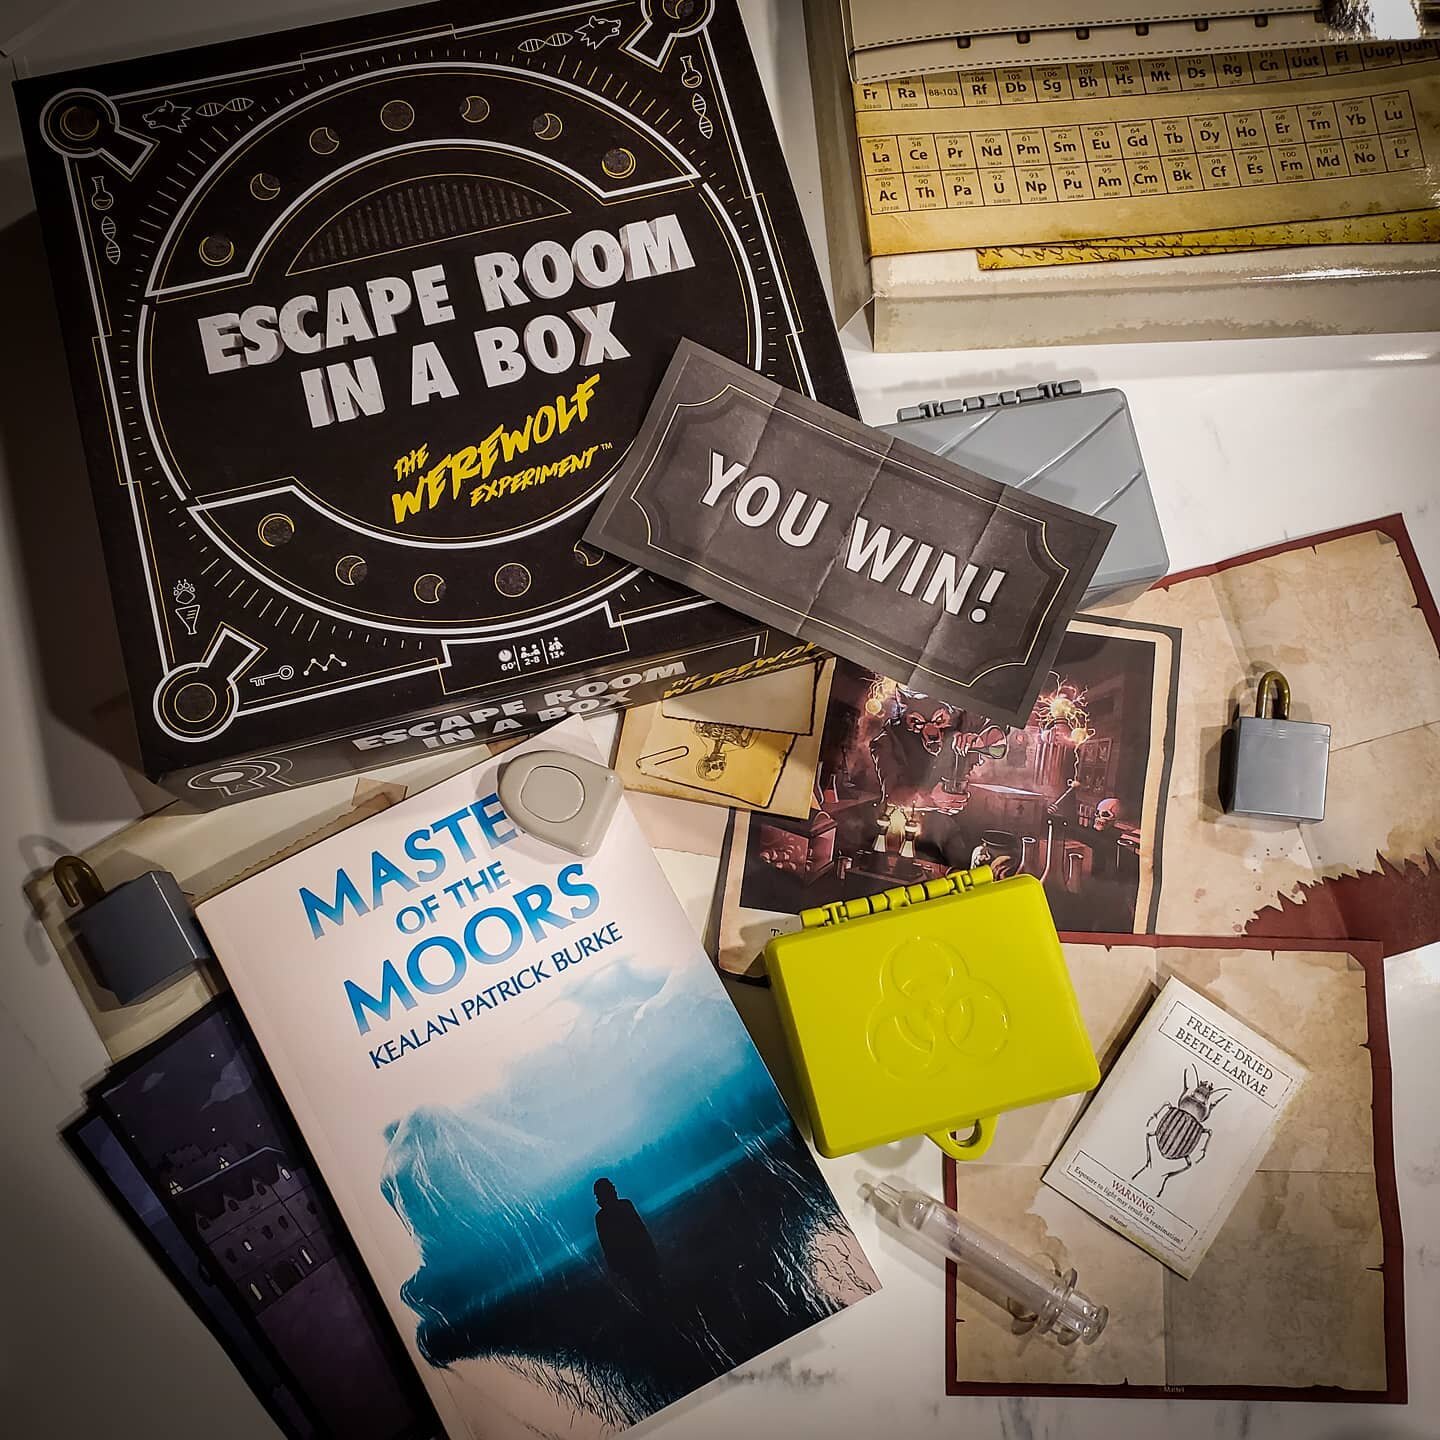 Today's boardgames and books is brought to you by Escape Room in a Box: The Werewolf Experiment and the book Master of the Moors by @kealanpatrick. Fun game and fun book. I haven't finished the book but I have finished the game.
.
.
.
.
#booksofinsta